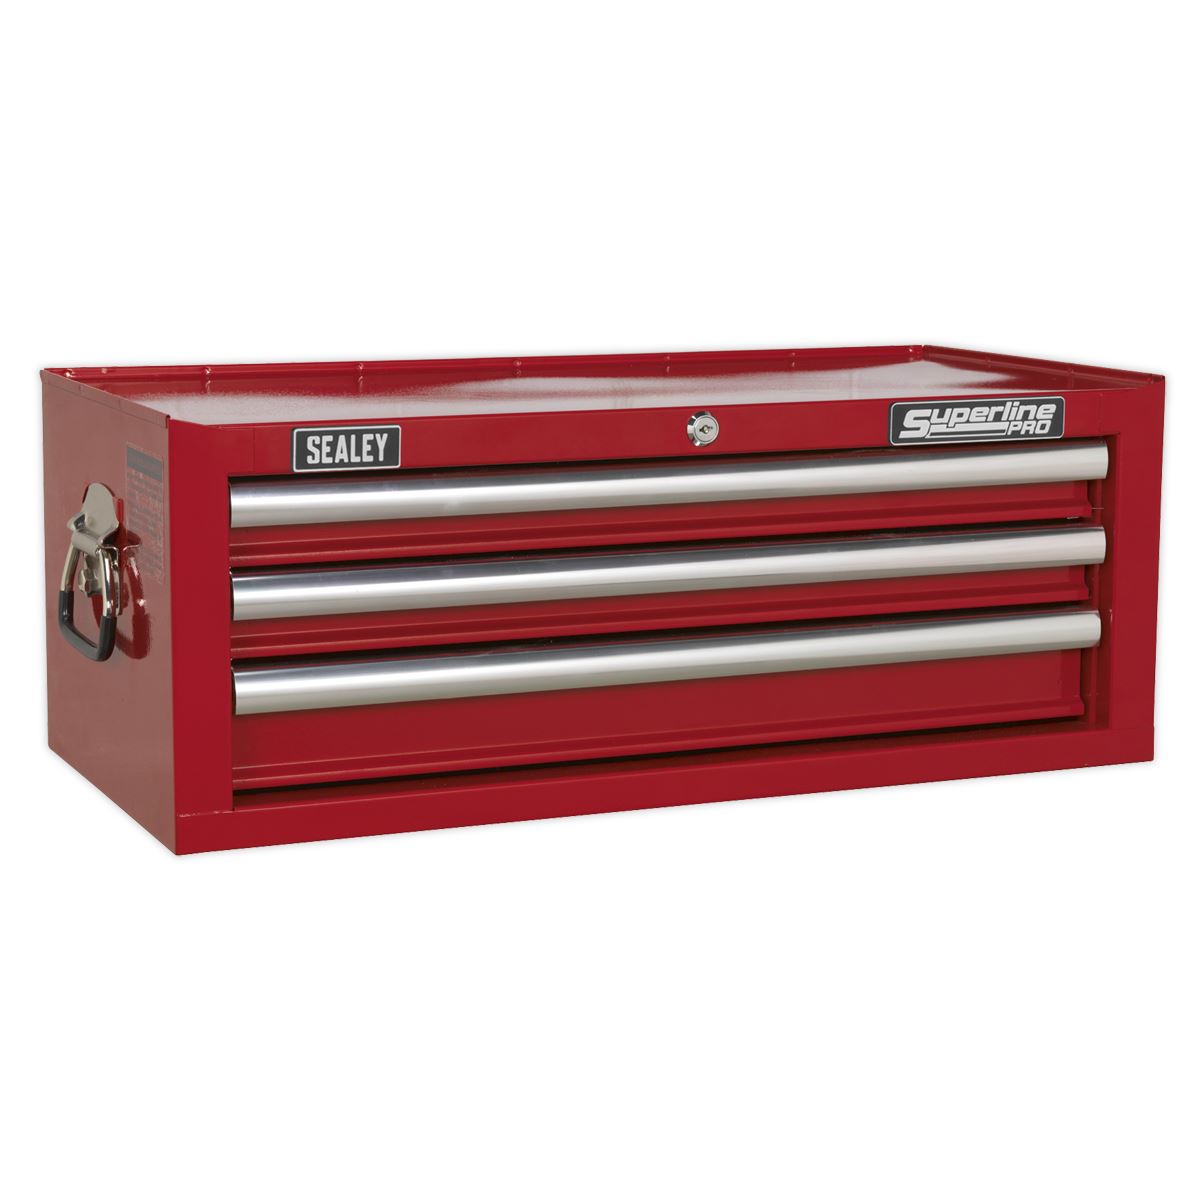 Sealey Superline Pro Mid-Box Tool Chest 3 Drawer with Ball-Bearing Slides - Red